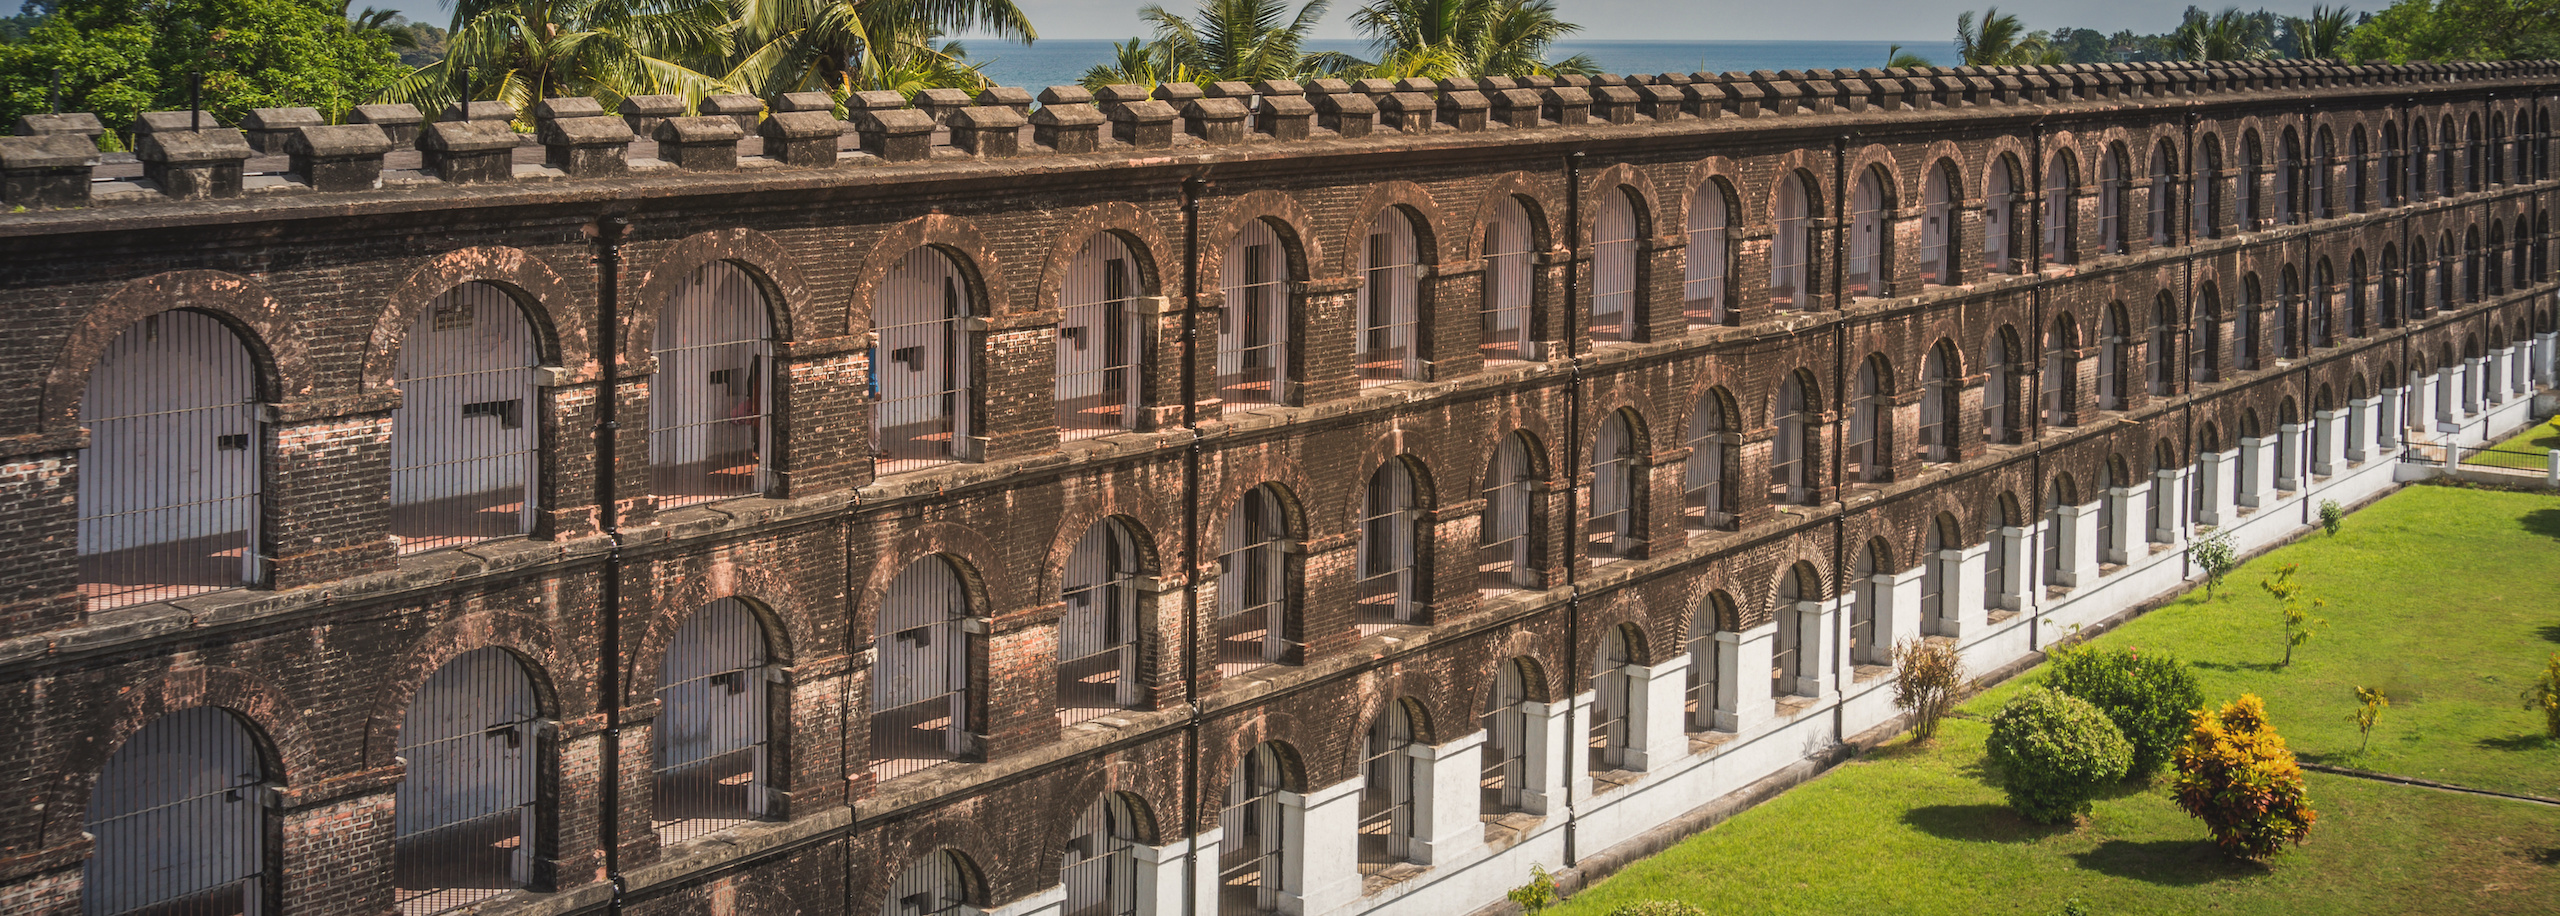 A glimpse into the stark design of the isolated cells within Cellular Jail.